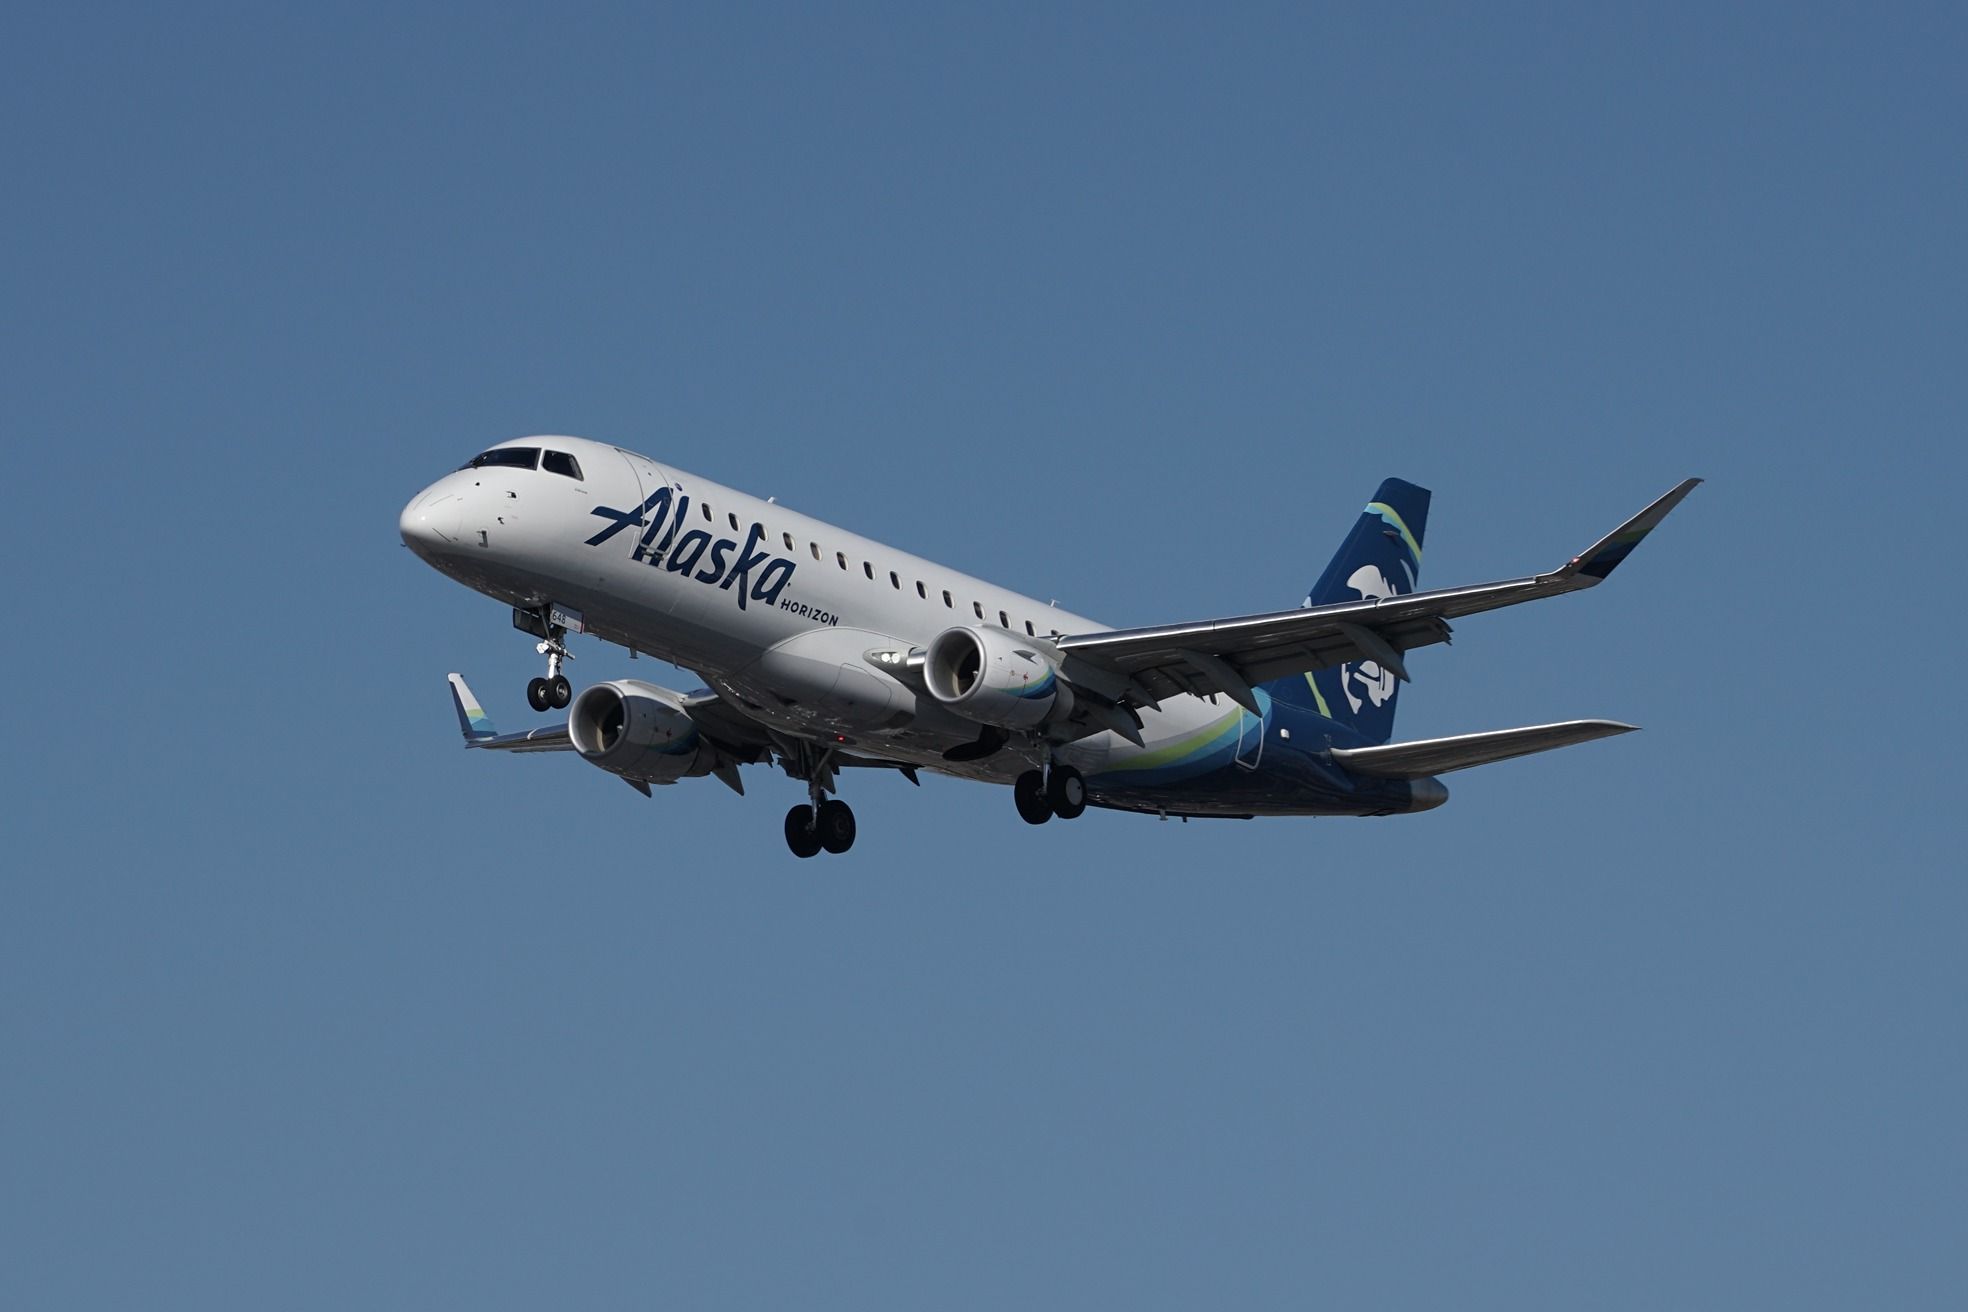 A Horizon Air Embraer E175 flying in the sky.